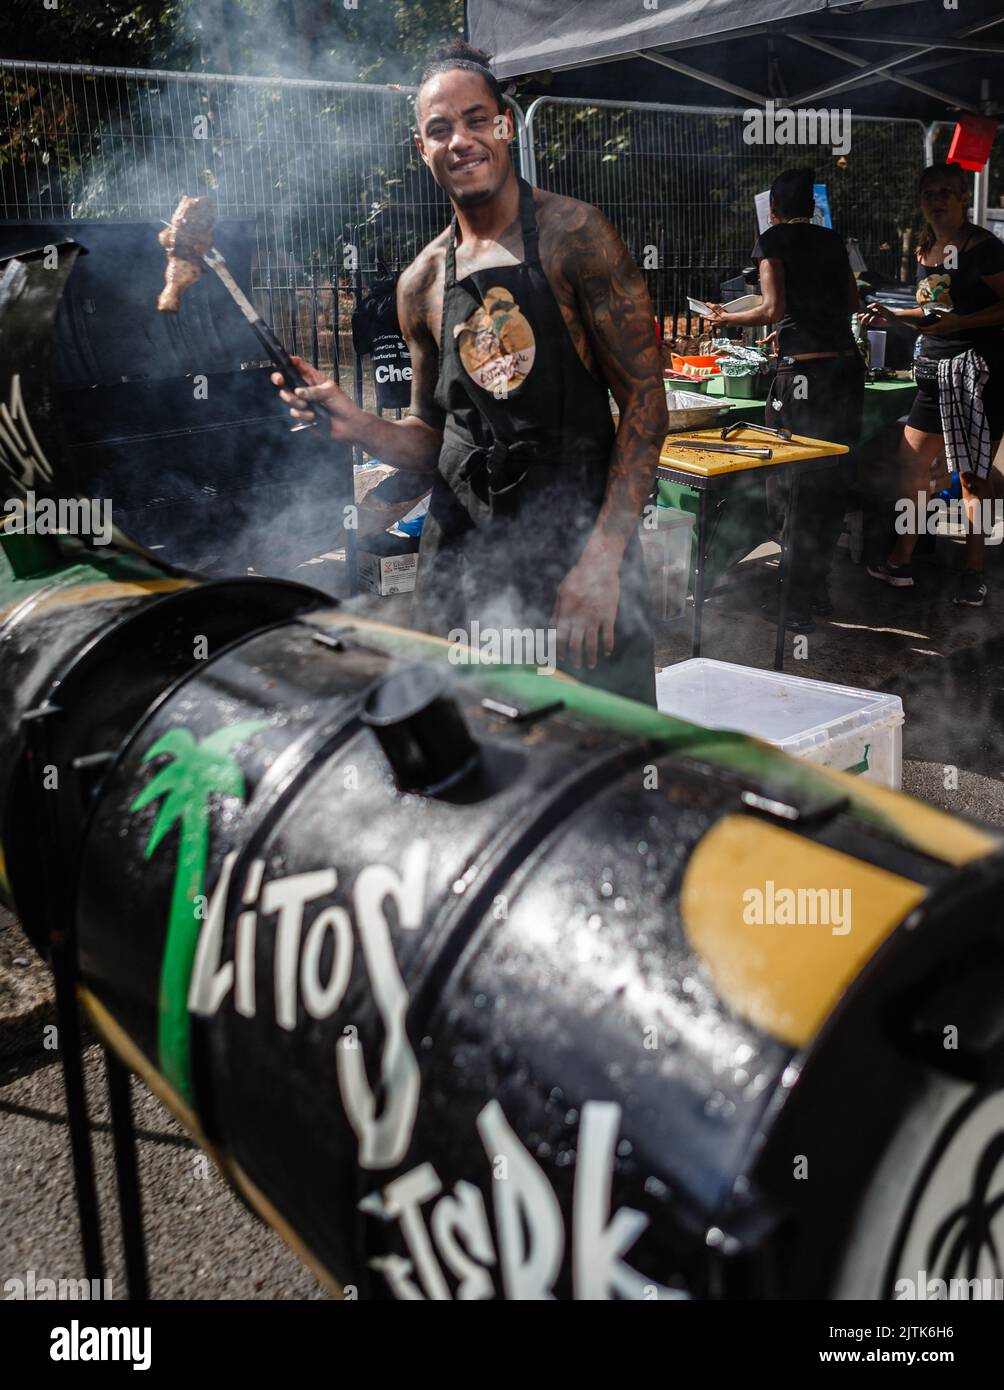 Steaming tasty grilled chicken at the Notting Hill Carnival. Stock Photo